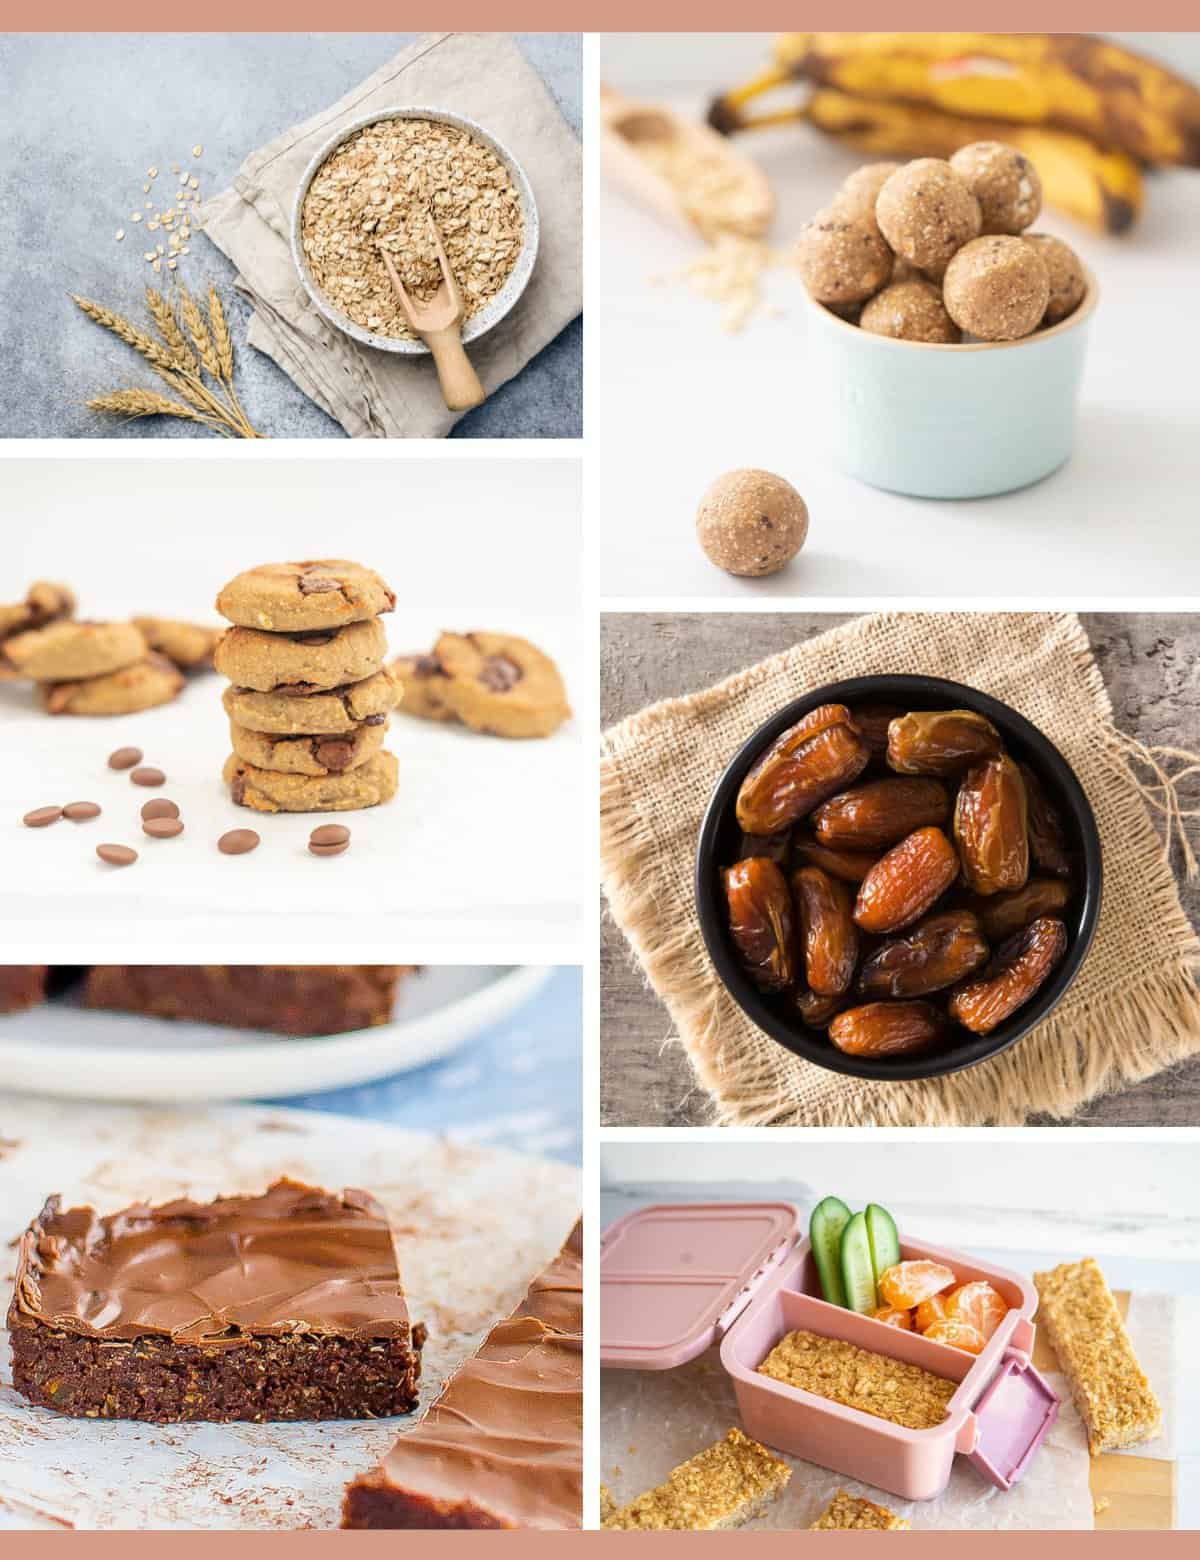 7 Iron Rich Foods and 16 Snack Recipes for Kids